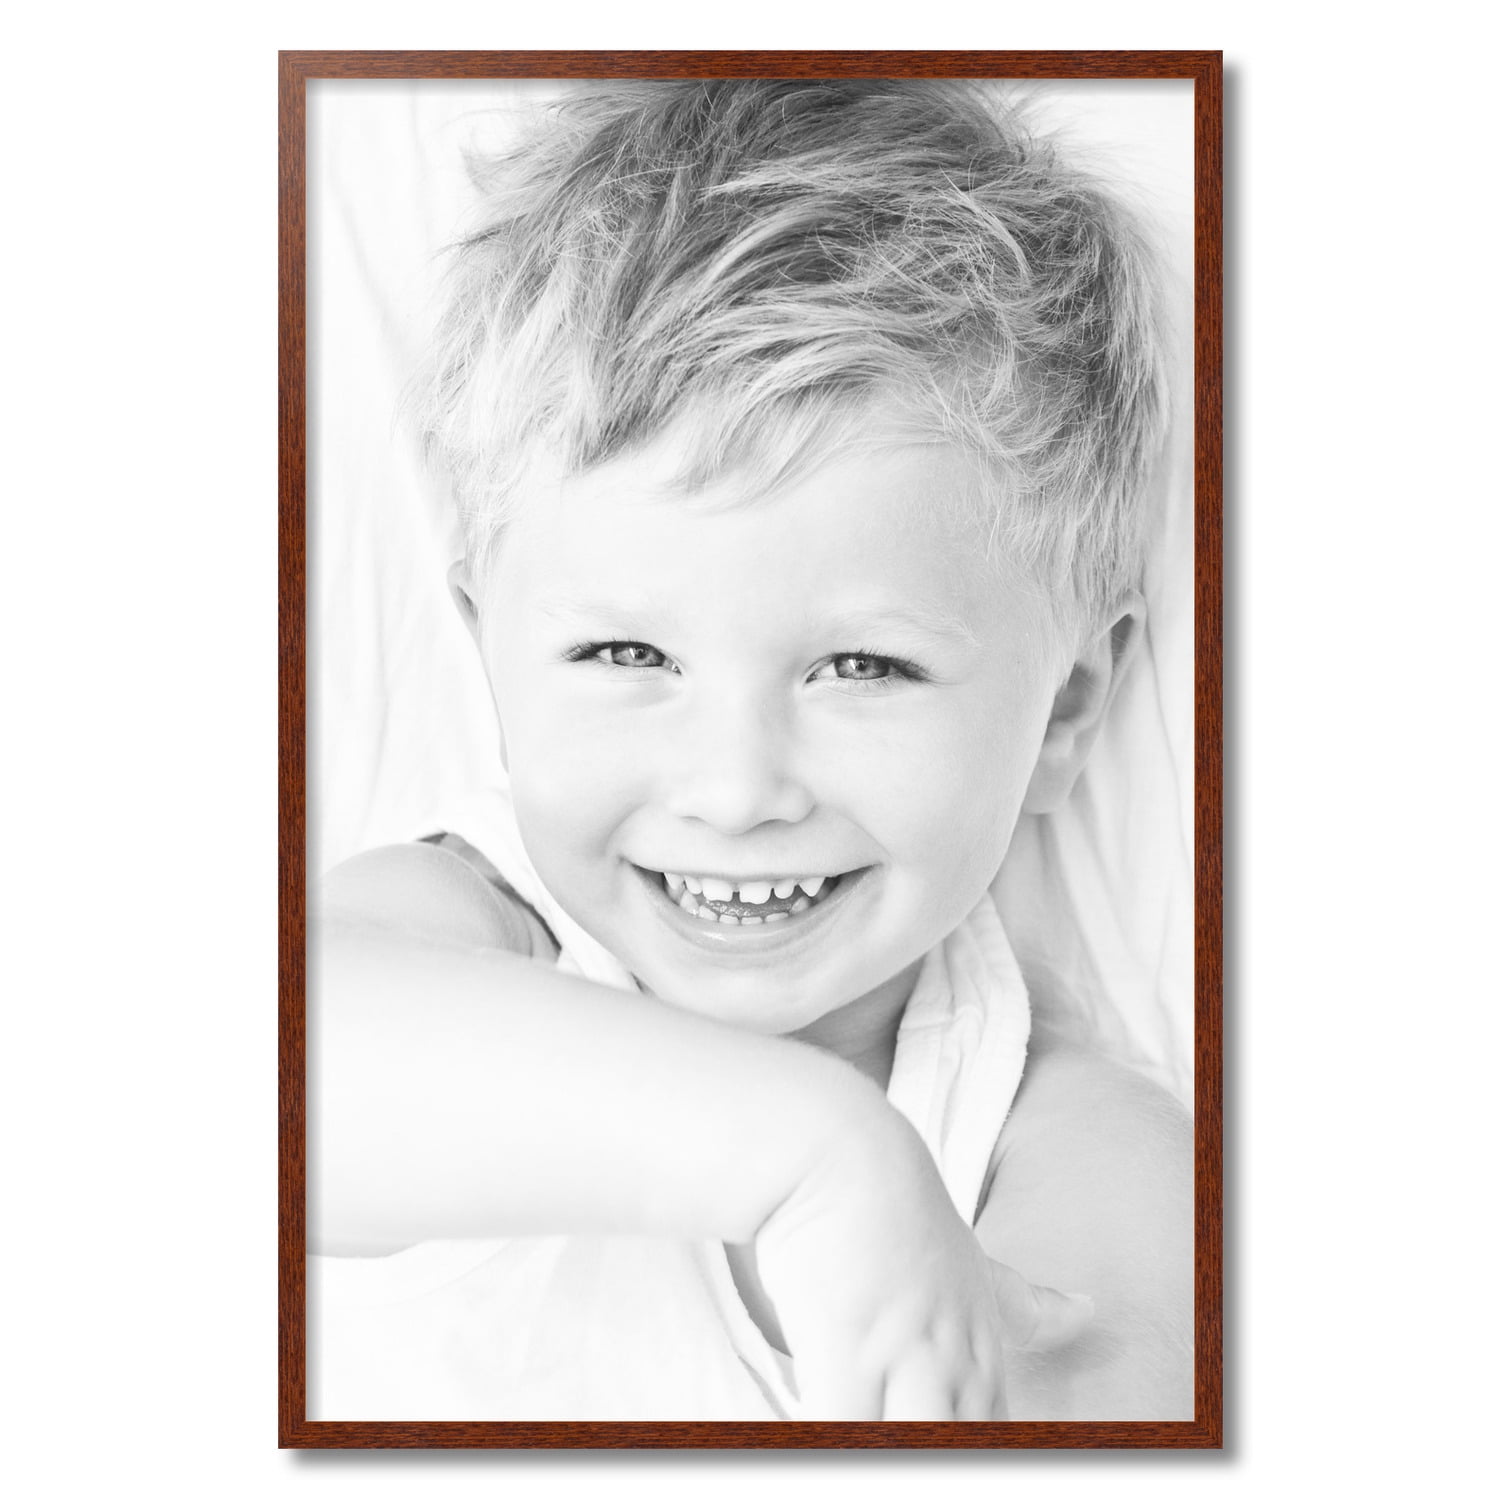  ArtToFrames 6x10 Inch Black Picture Frame, This 1.25 Inch  Custom Wood Poster Frame is Black - Comes with Regular Glass and Corrugated  Backing (2WOMD10188-6x10)